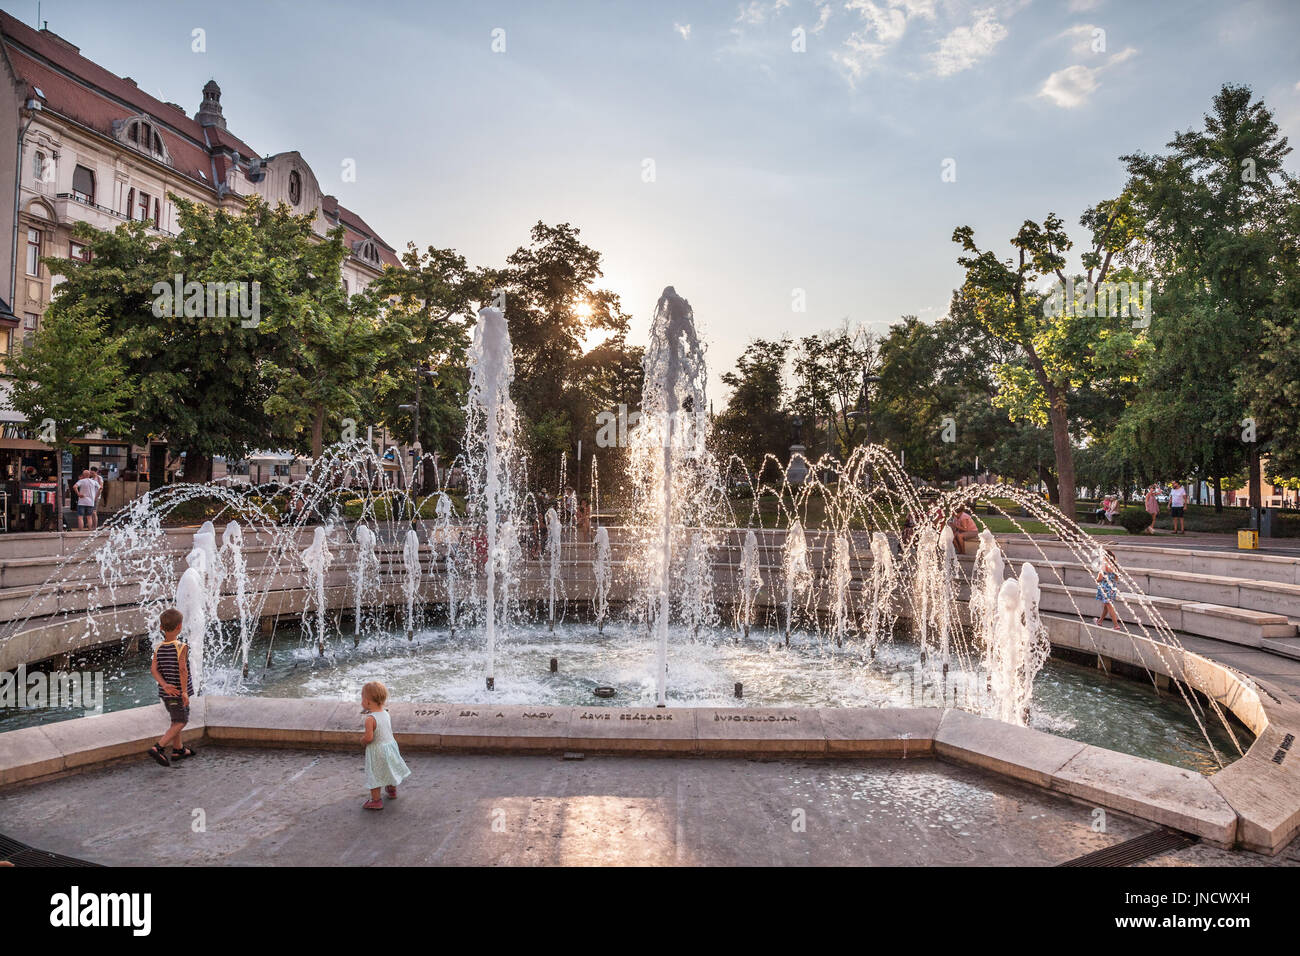 SZEGED, HUNGARY - JULY 20, 2017: Foutain on Dugonics Ter Square with children playing in front. This square, and the university building on it, are sy Stock Photo